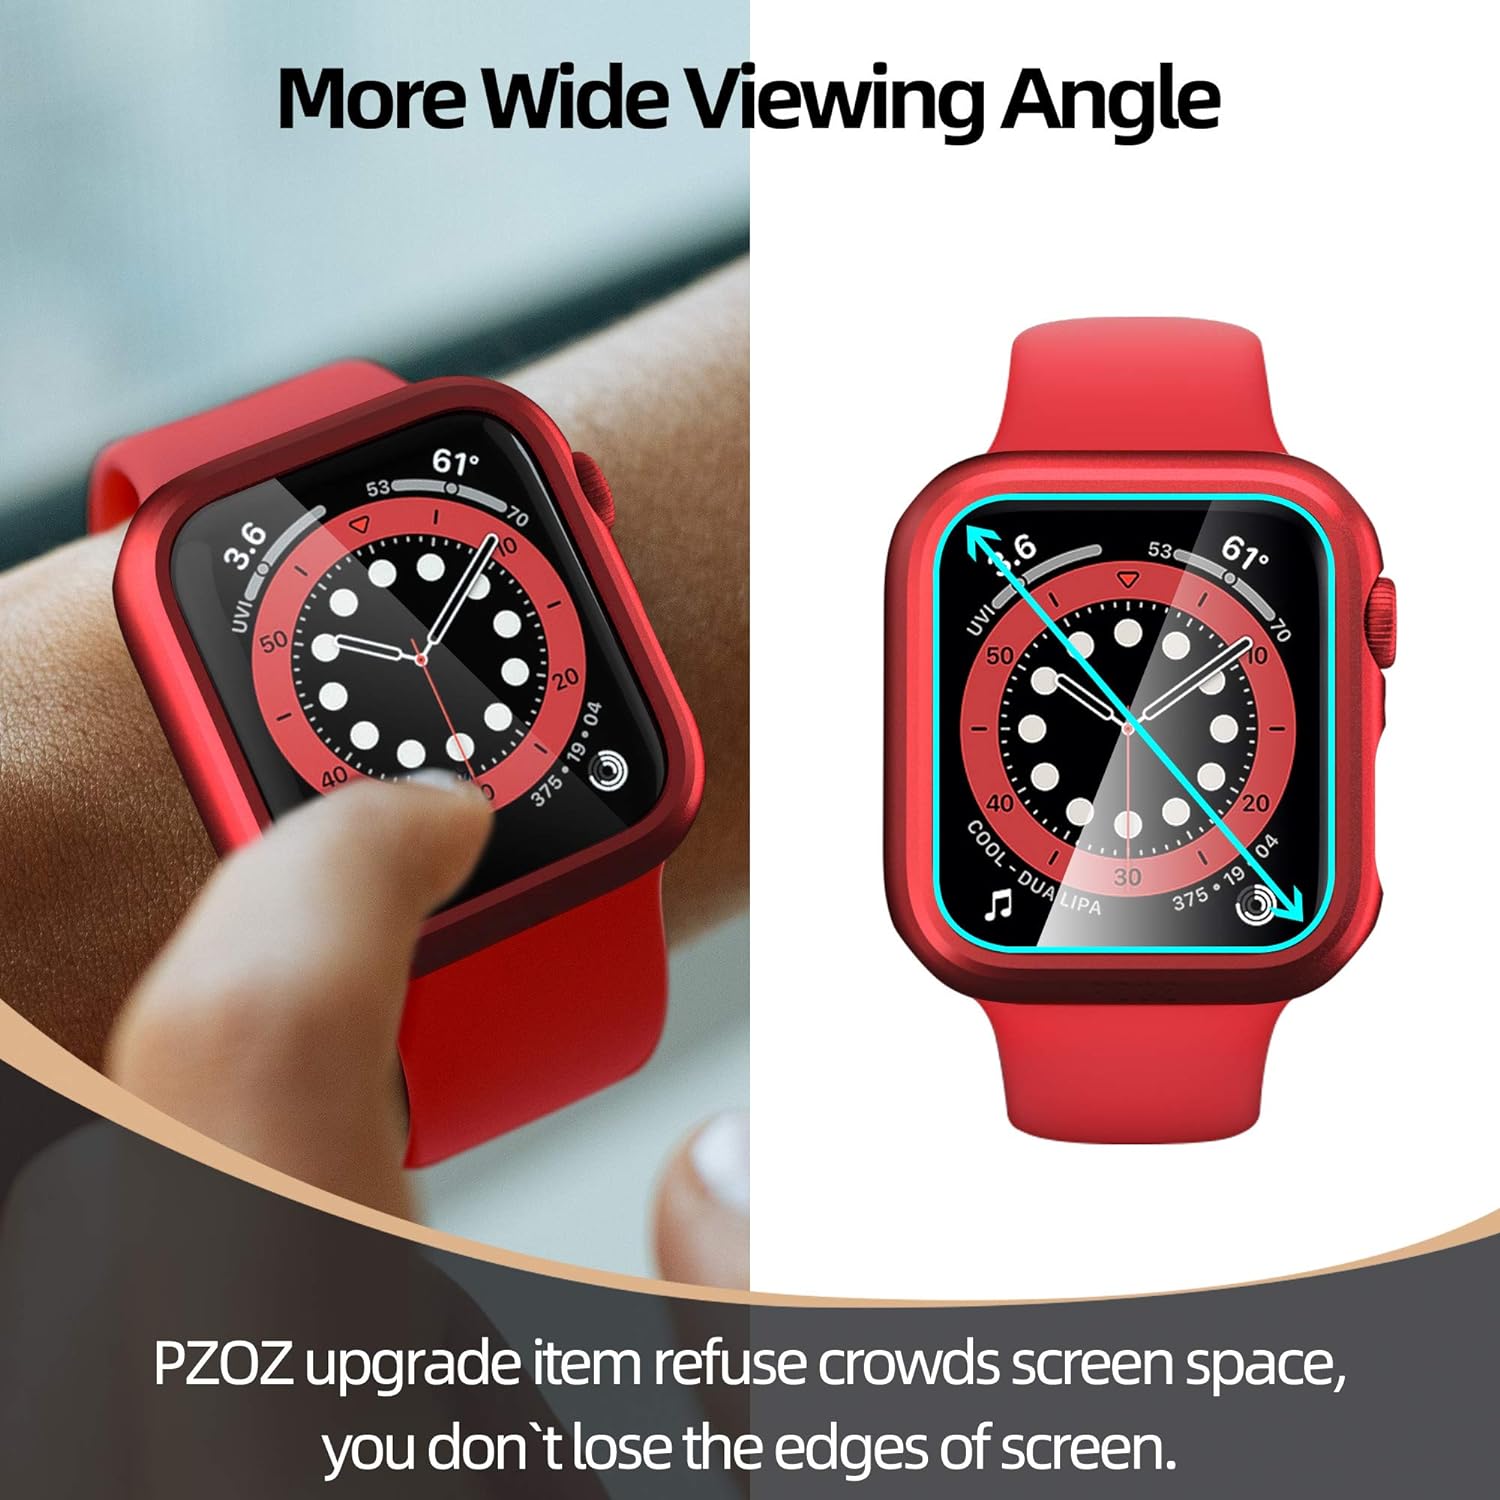 pzoz Compatible Apple Watch Series 6/5 /4 /SE 44mm Case with Screen Protector Accessories Slim Guard Thin Bumper Full Coverage Matte Hard Cover Defense Edge for Women Men New Gen GPS iWatch (Red)